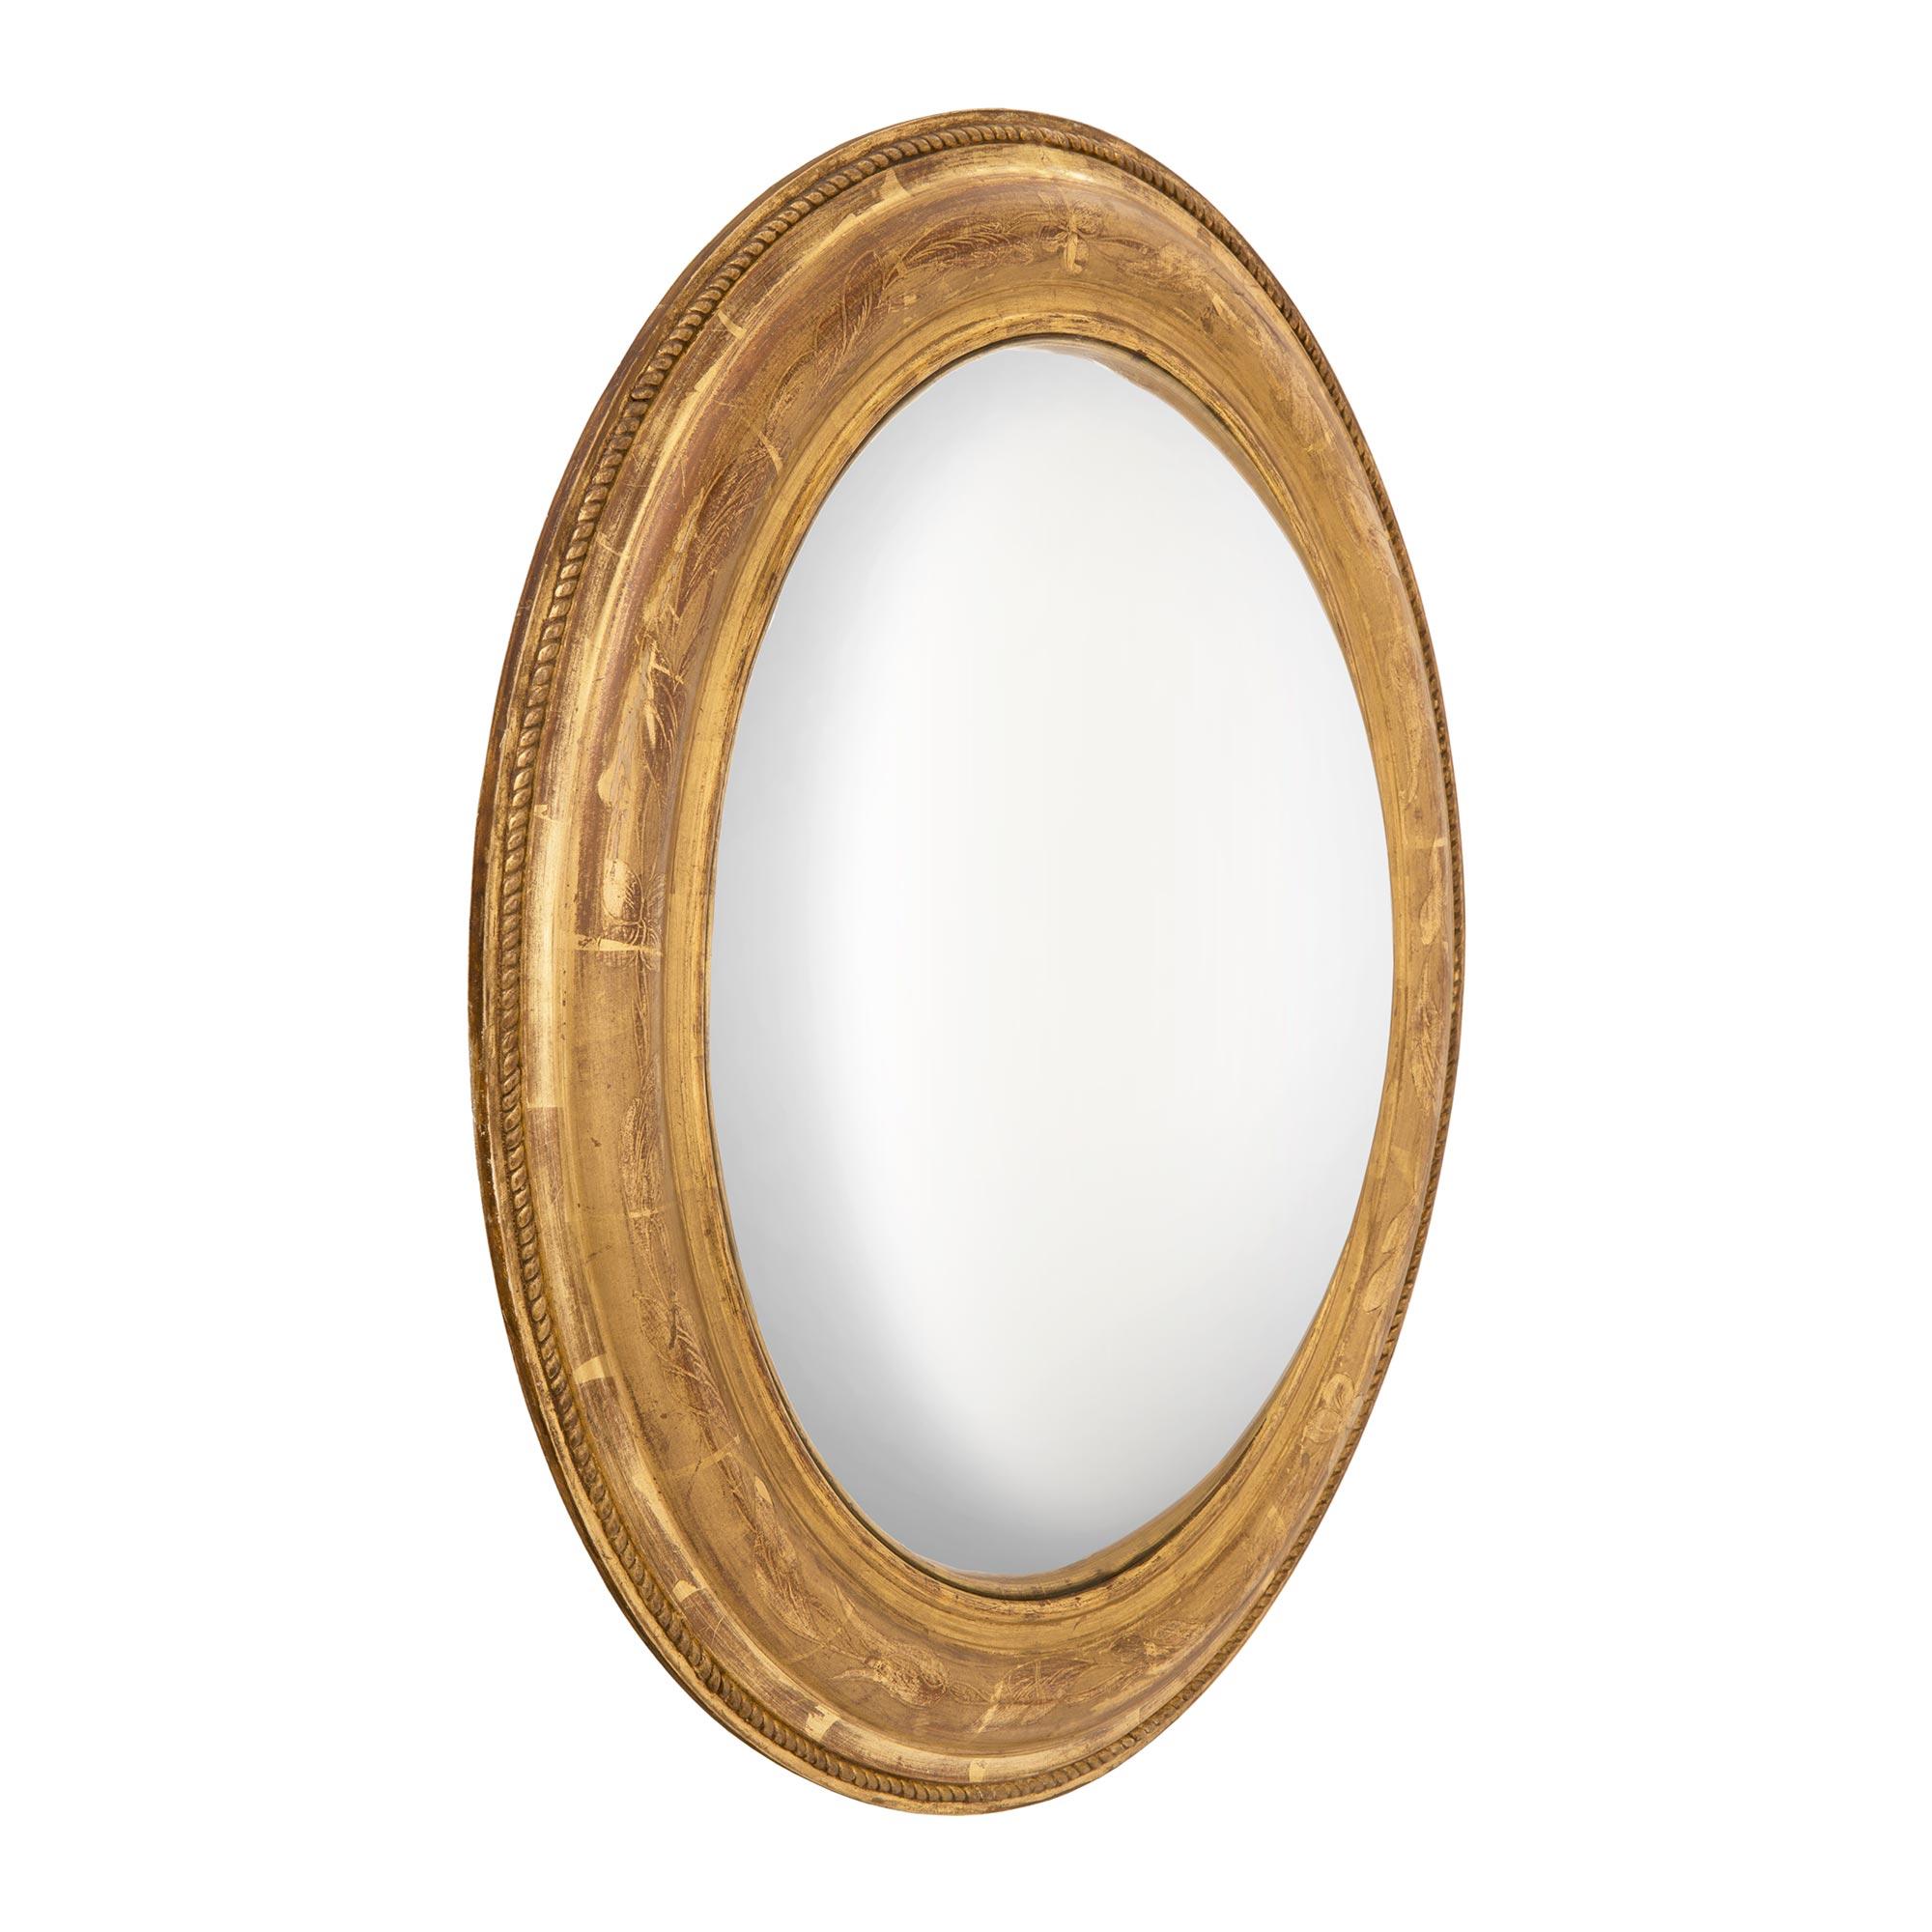 A lovely French 19th century Louis XVI st. oval giltwood mirror. The convex, or fisheye, original mirror plate is fitted within a most decorative mottled frame. The frame displays richly detailed carved foliate designs throughout and fine carved